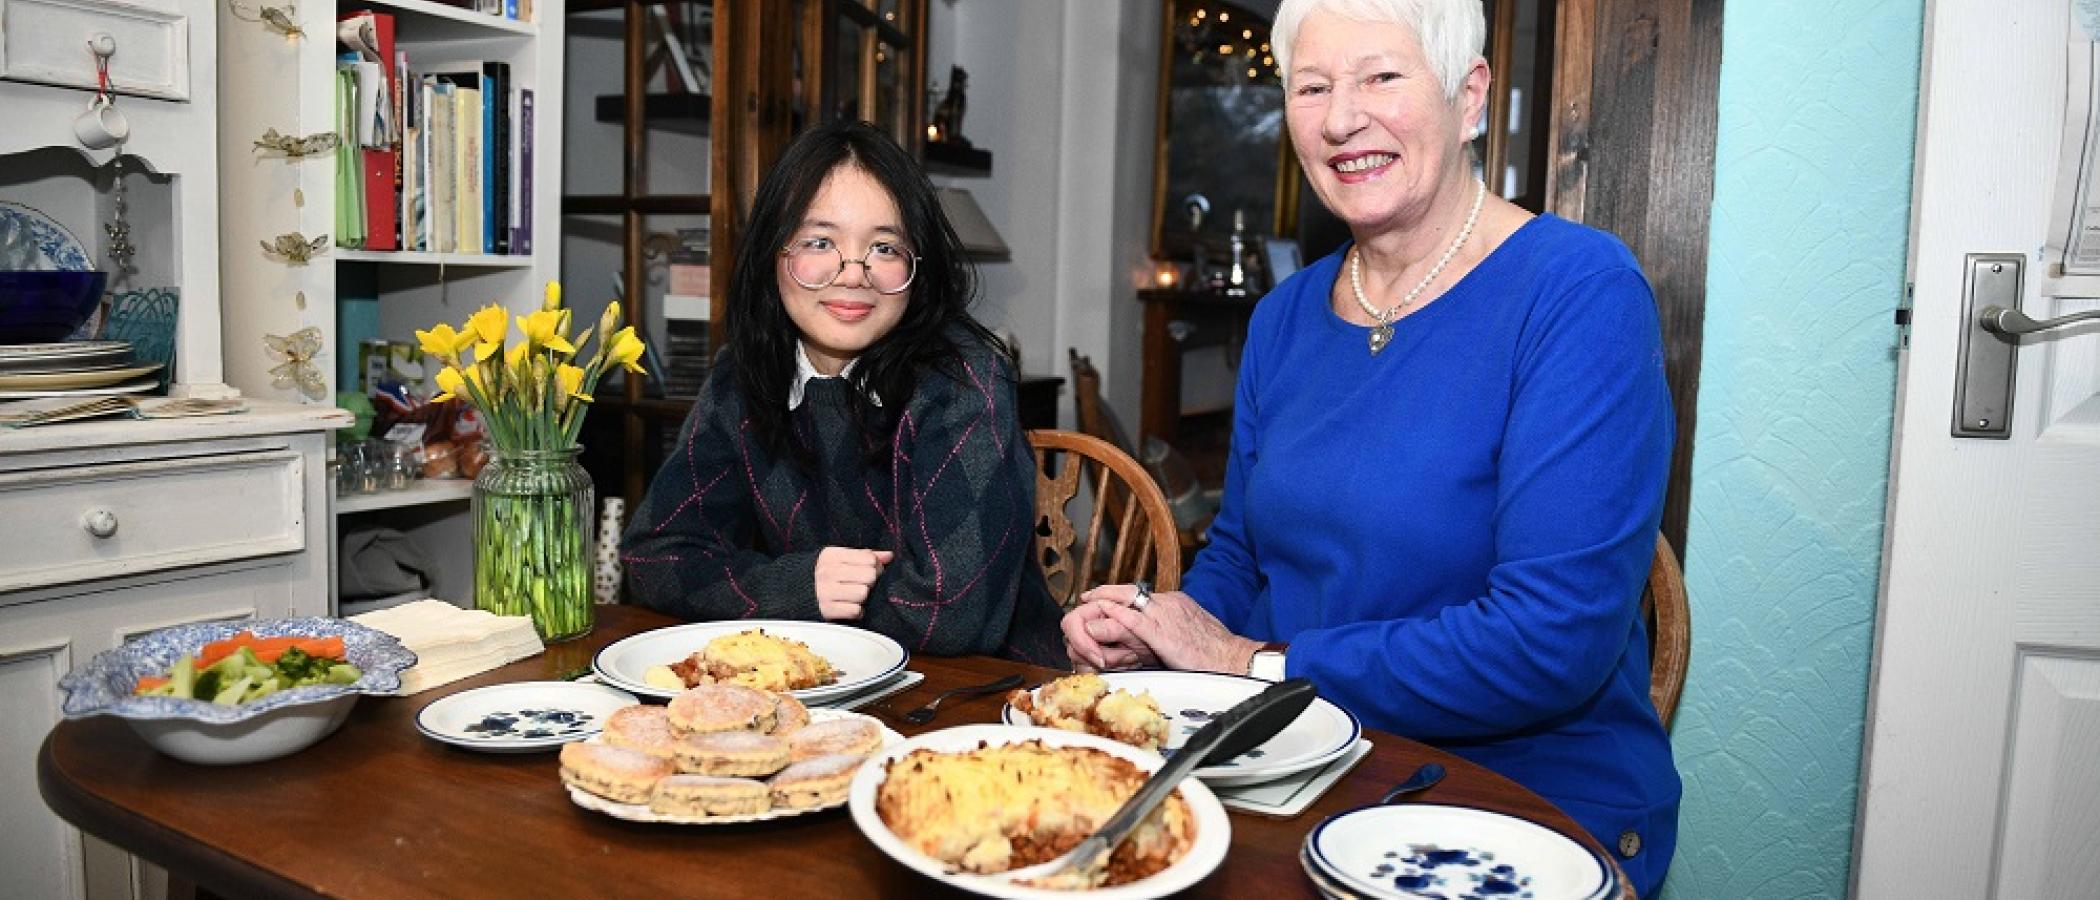 Sue Morris and Nguyen Nghi having dinner at the table